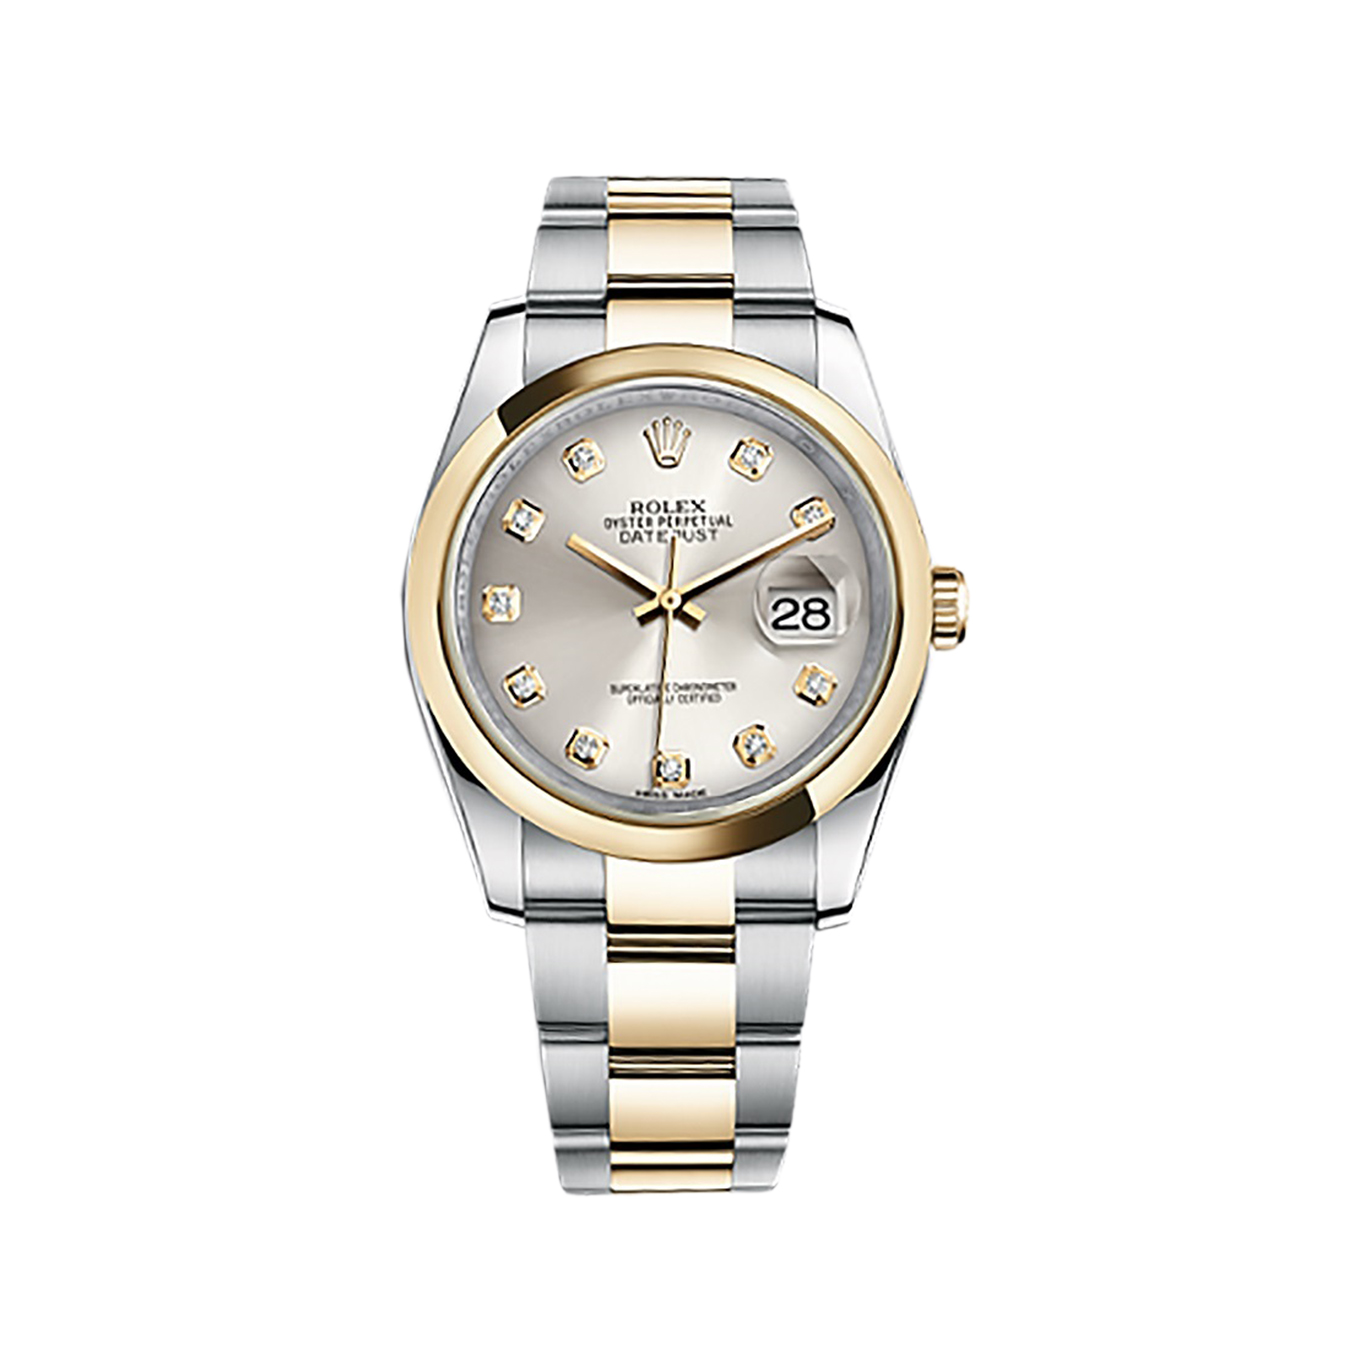 Datejust 36 116203 Gold & Stainless Steel Watch (Silver Set with Diamonds) - Click Image to Close